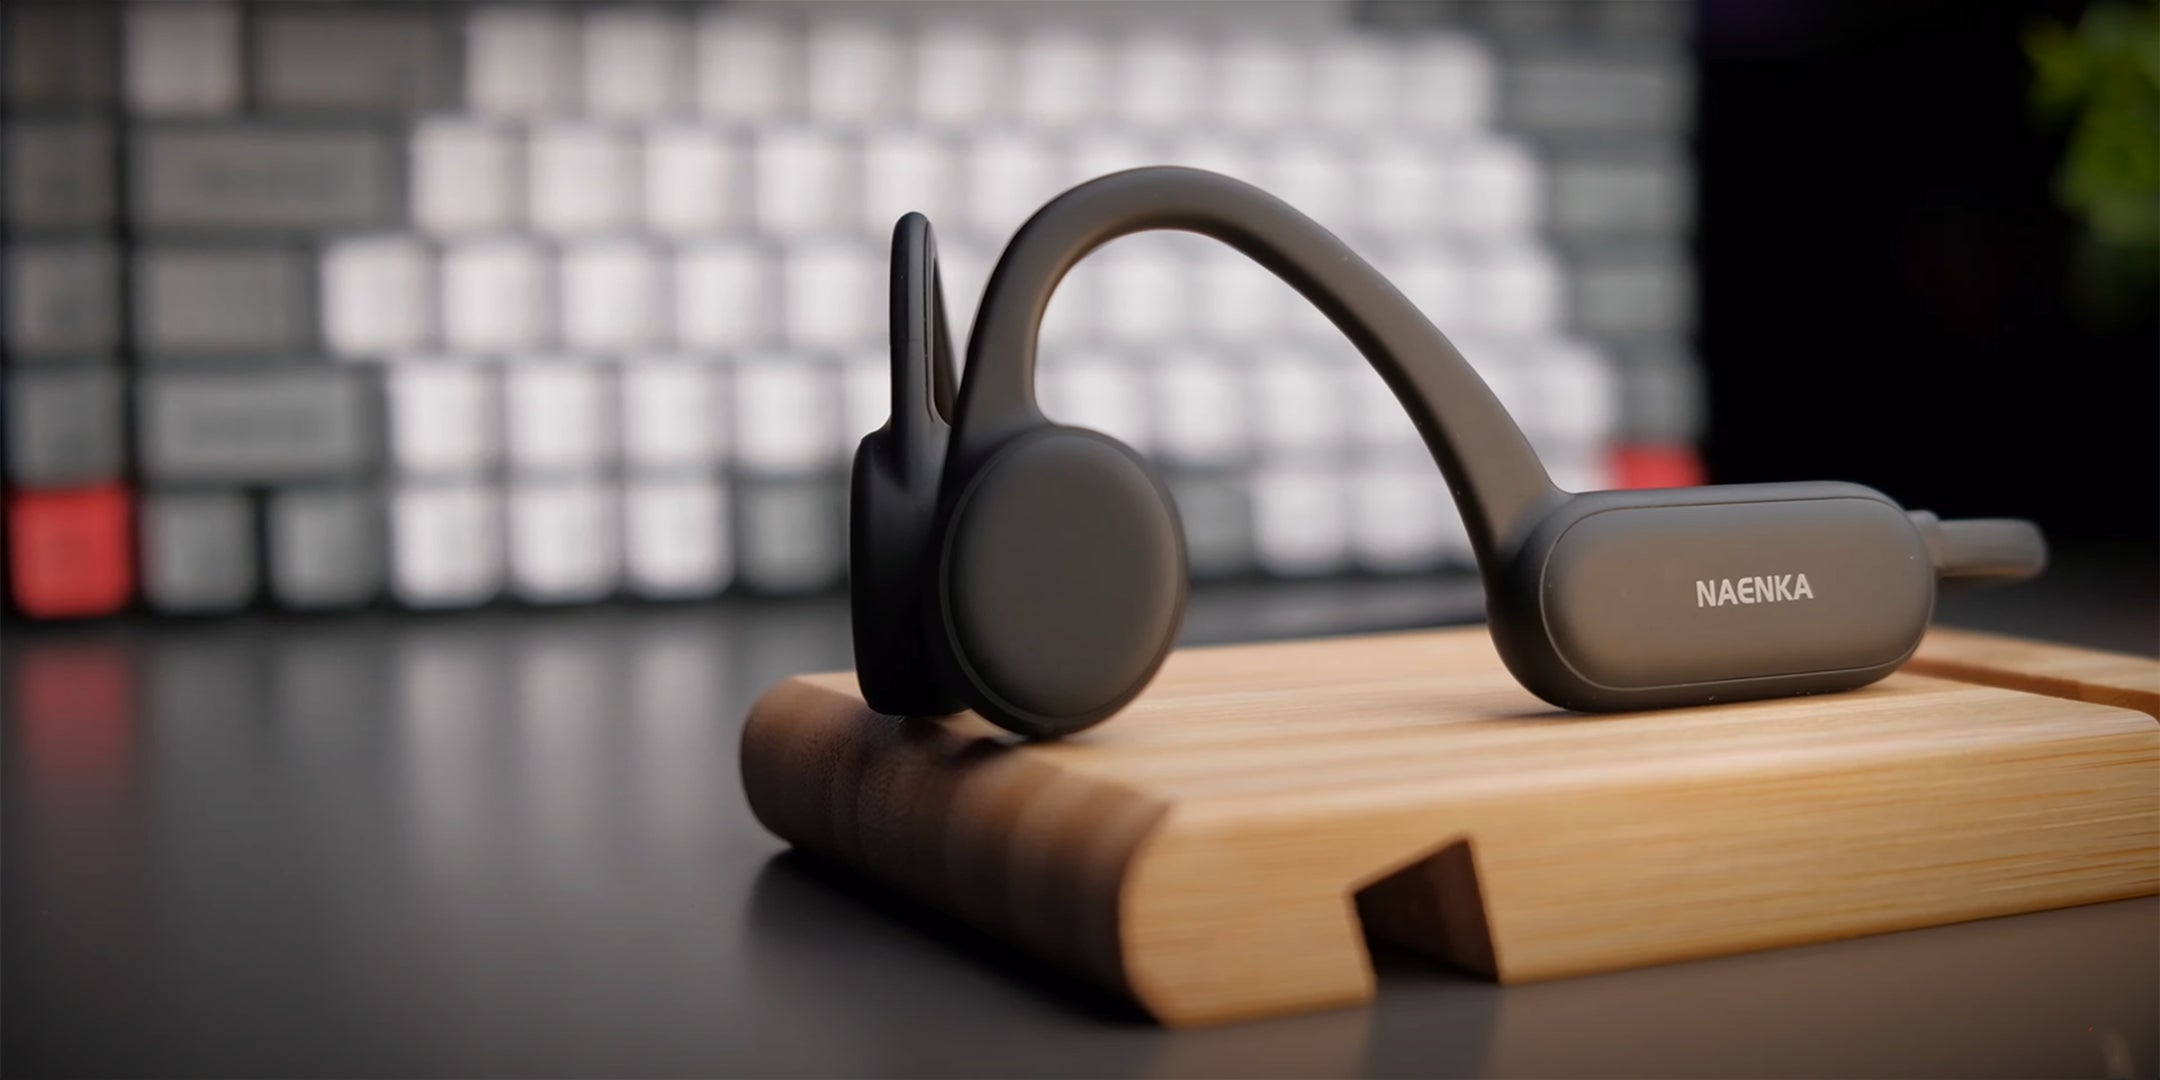 The black Naenka bone conduction headphones are placed on the tabletop